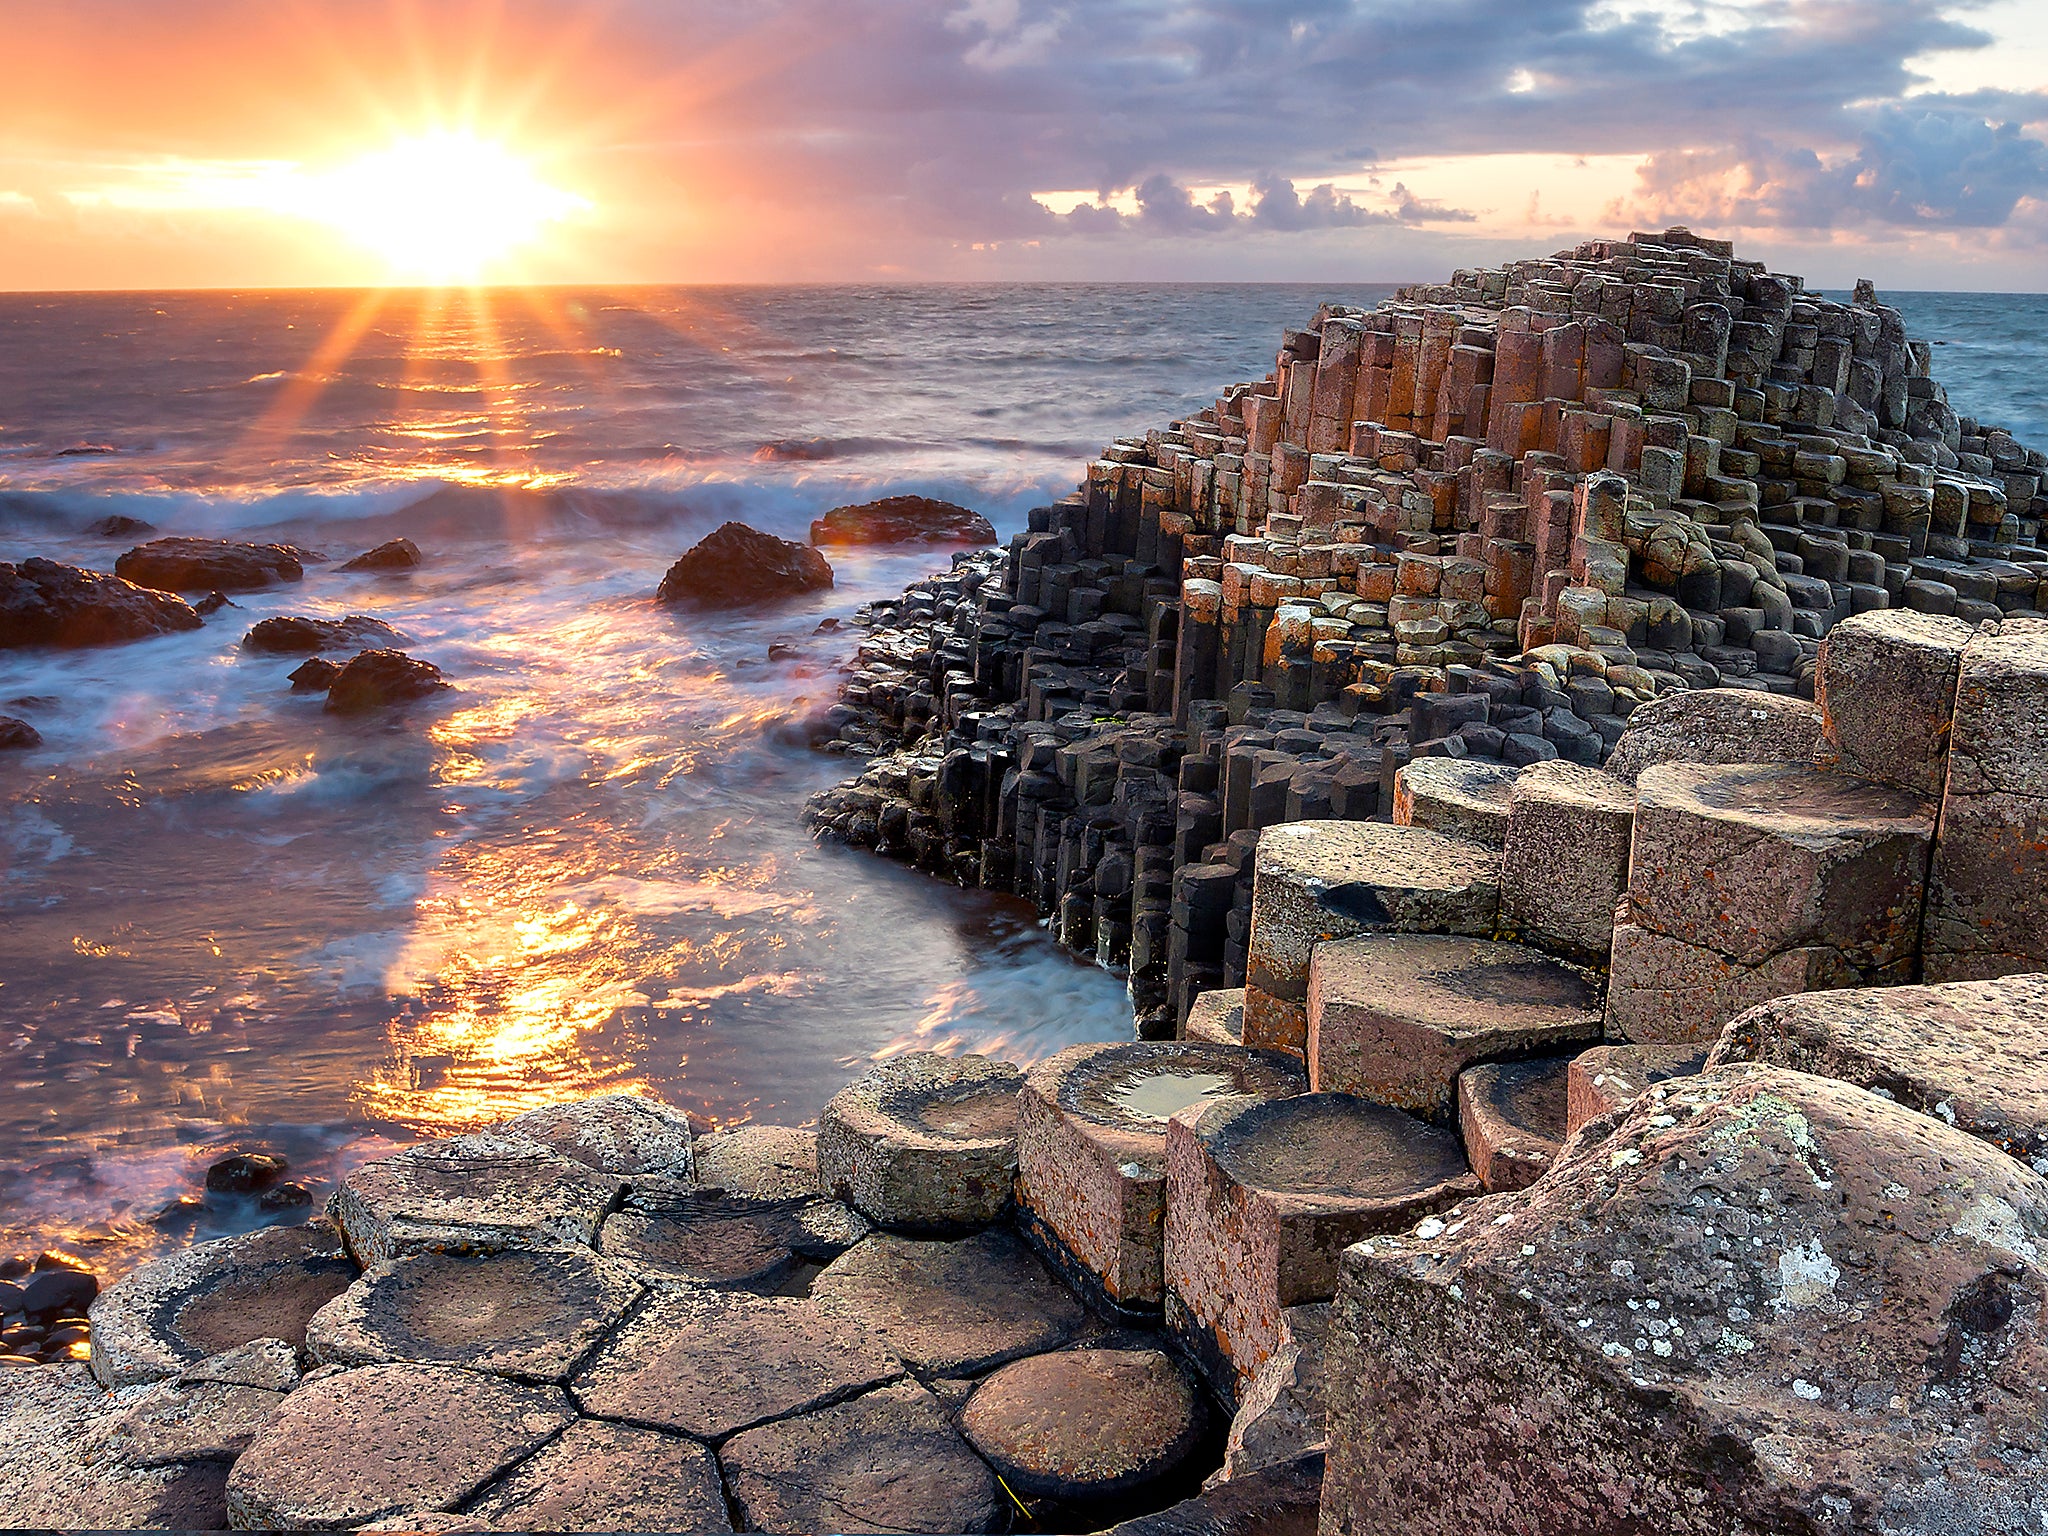 Last year, 2.5 million visitors to Northern Ireland fuelled an industry worth £800m